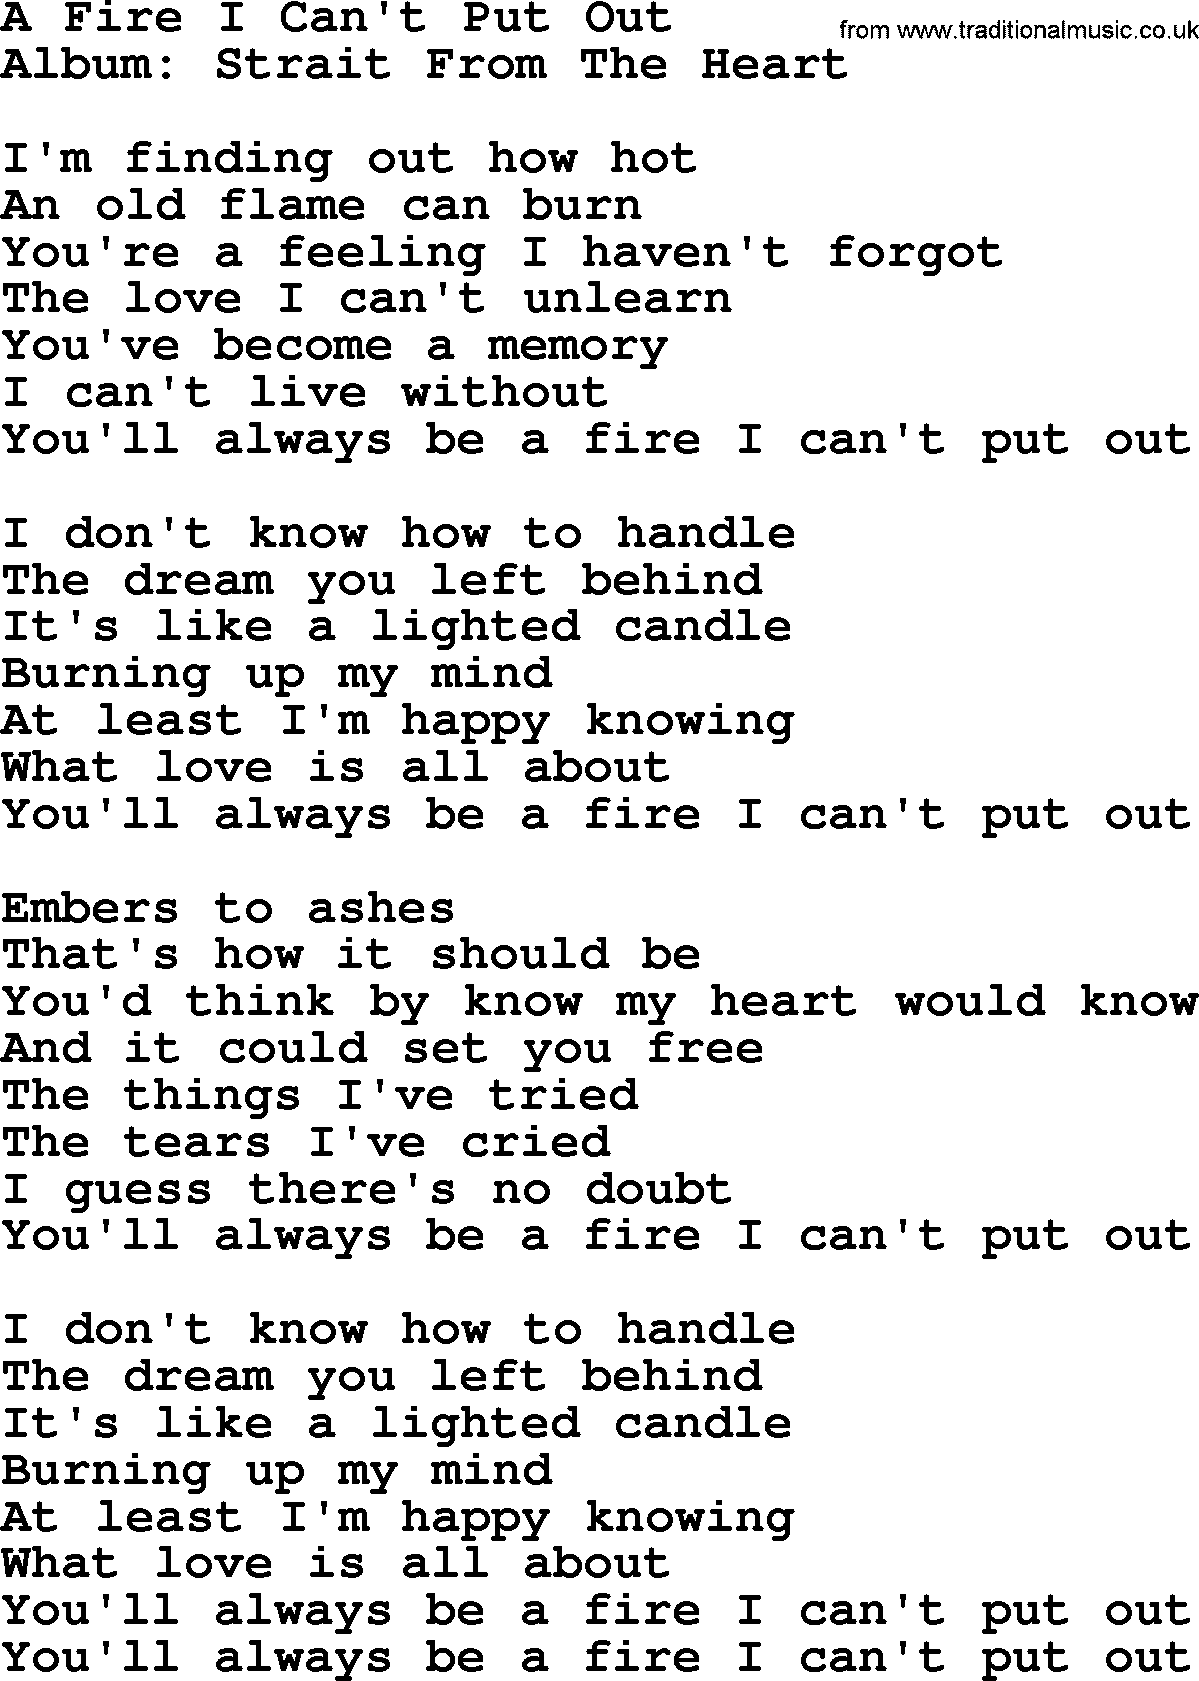 George Strait song: A Fire I Can't Put Out, lyrics